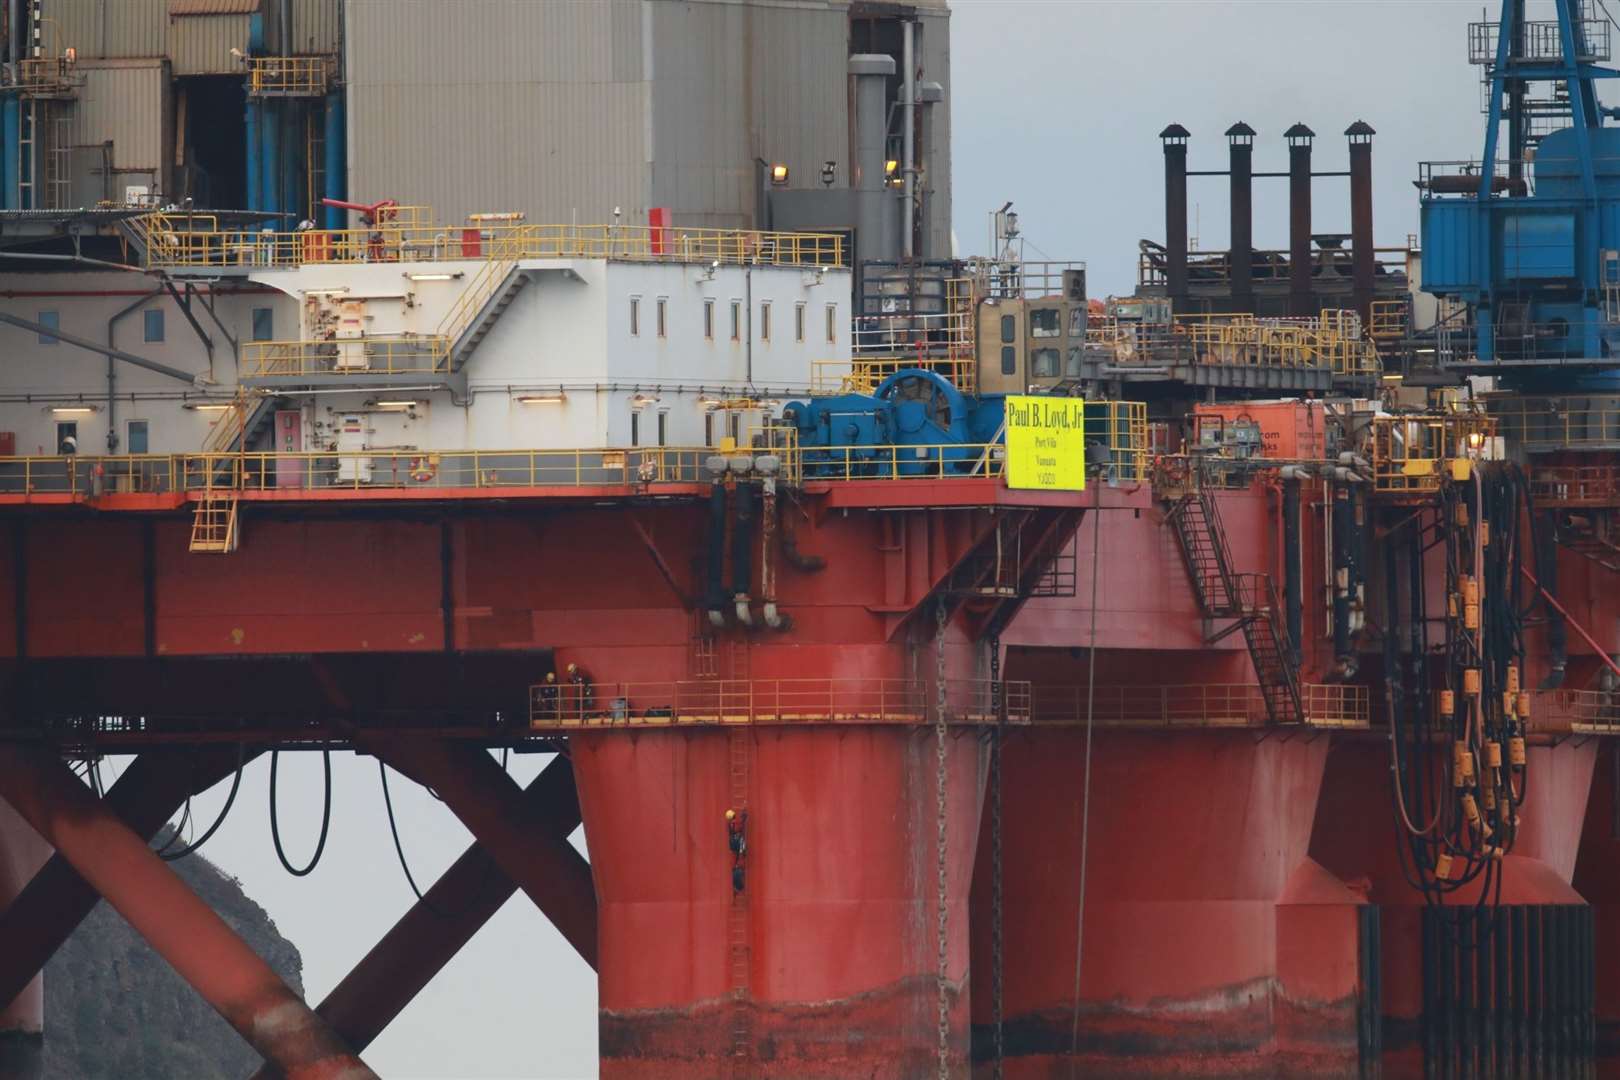 Greenpeace climbers on the BP oil rig in the Cromarty Firth.